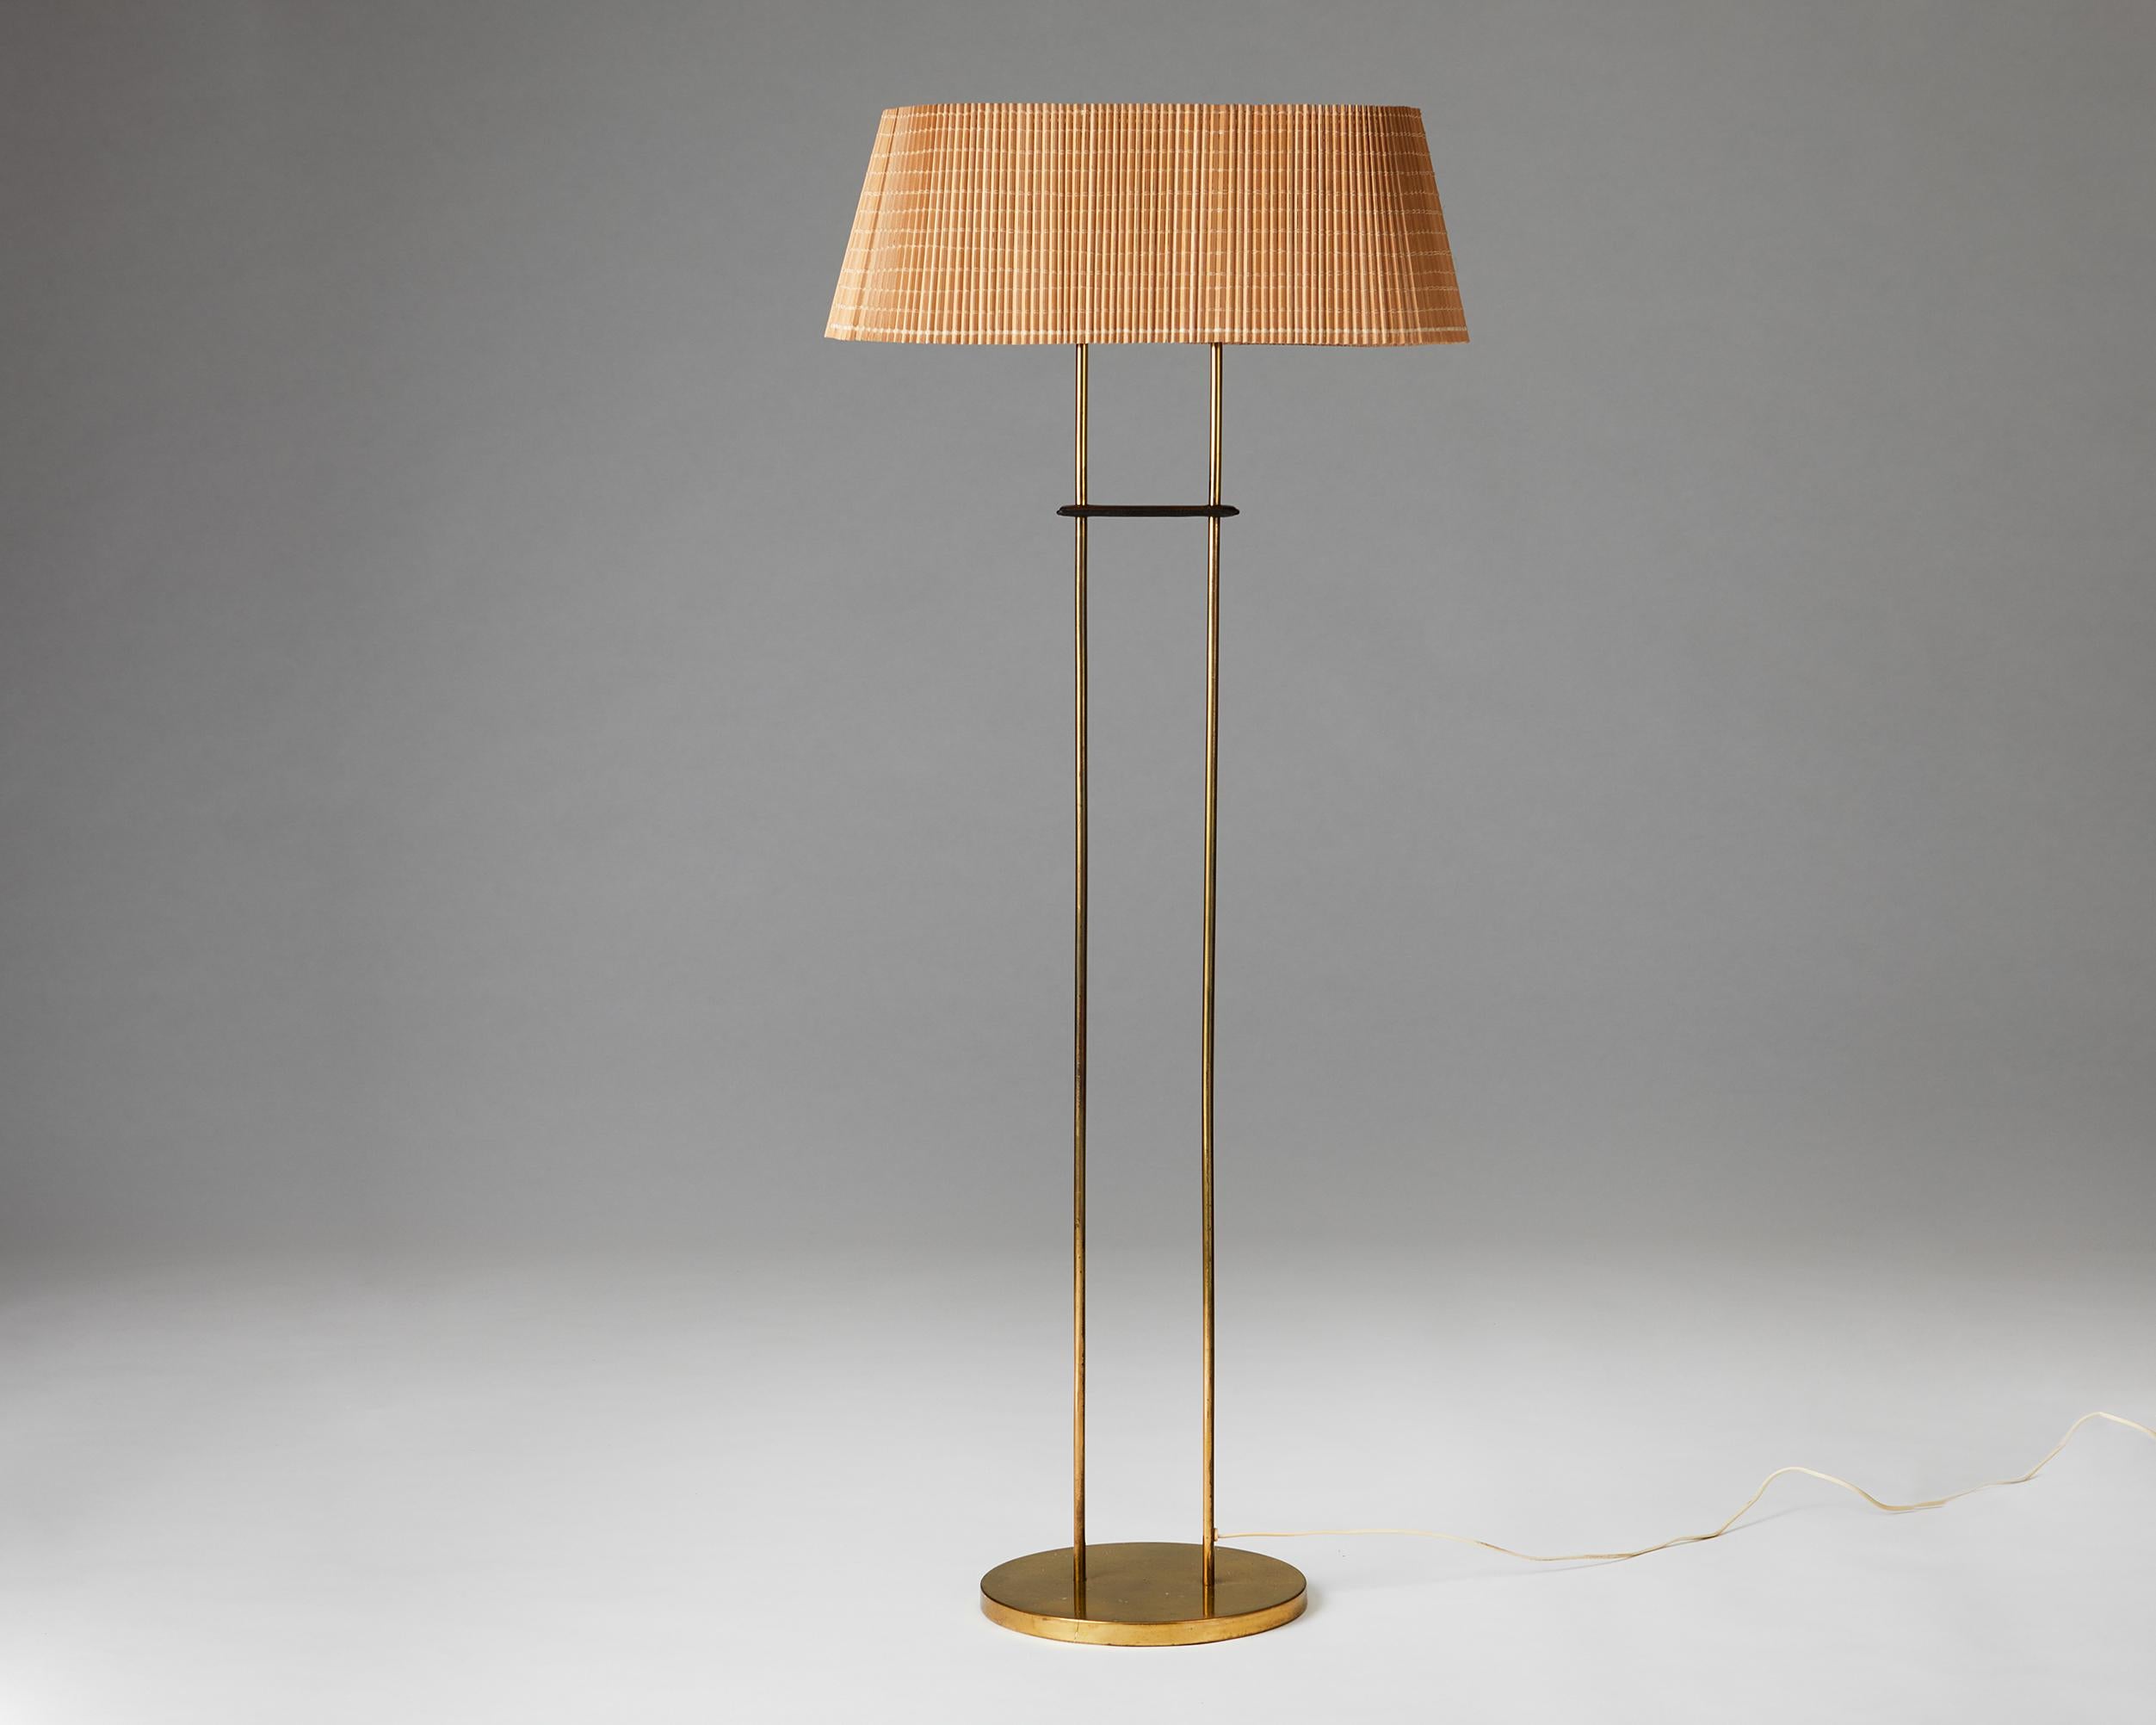 Floor lamp designed by Paavo Tynell for Taito Oy, Finland, 1940s

One of the best-loved and most acclaimed Finnish designers – Paavo Tynell was born in Helsinki, Finland, in 1890. He was an industrial designer, often referred to as ‘the man who